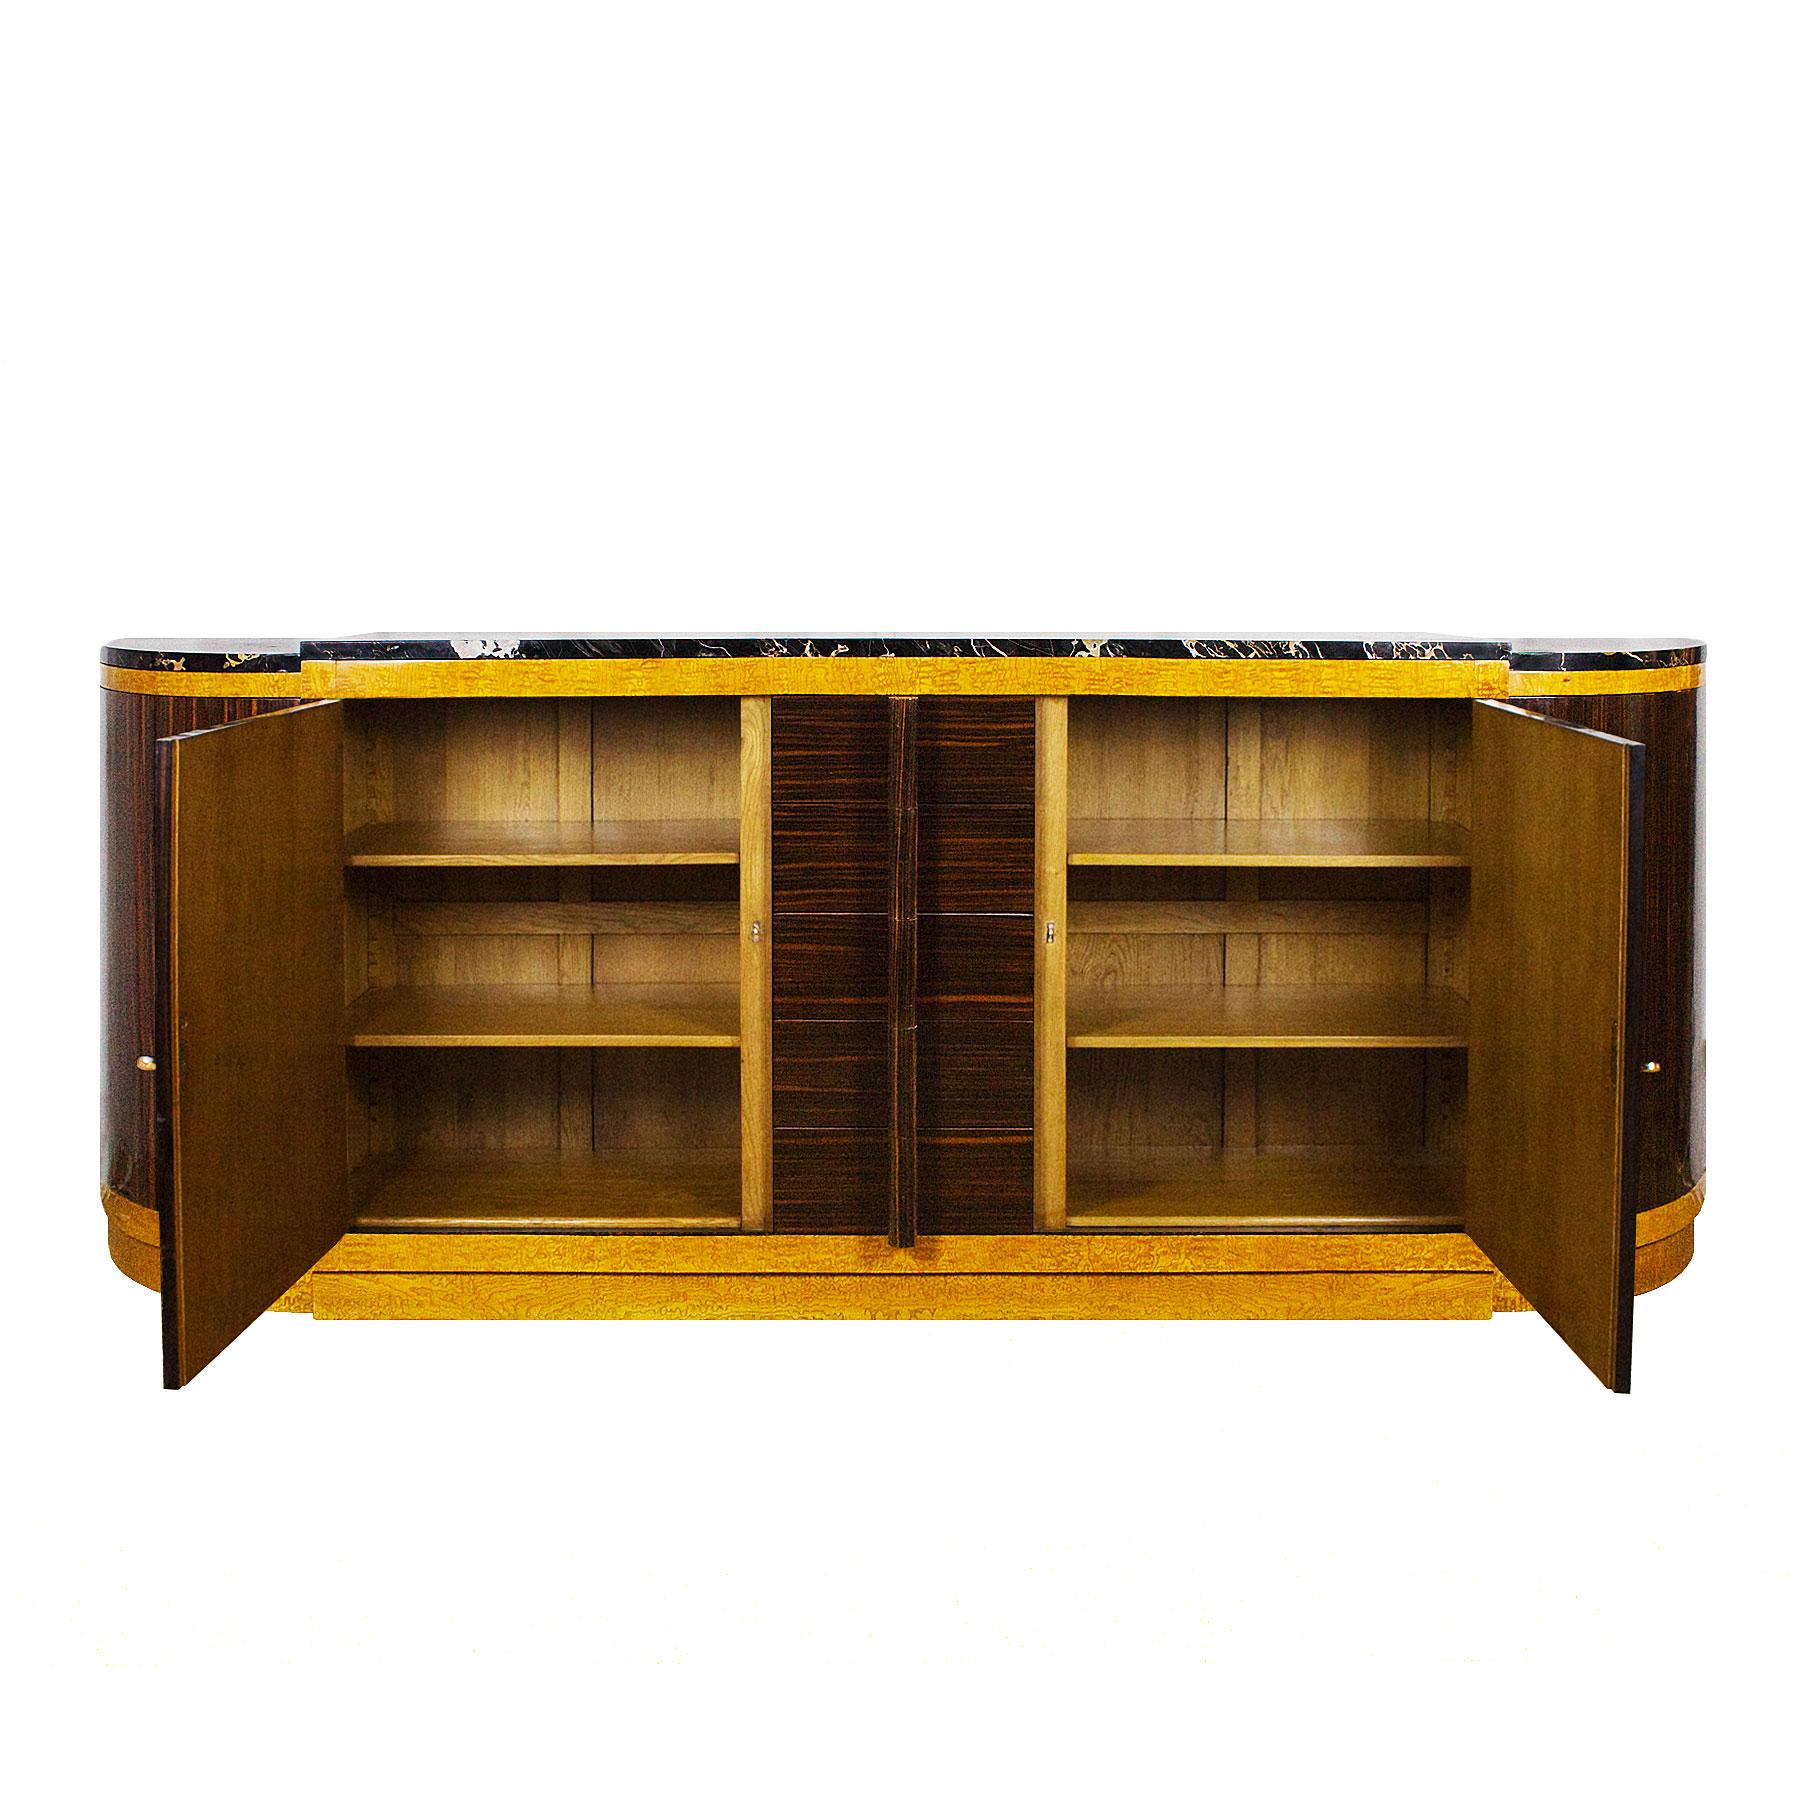 Mid-20th Century Rounded Art Deco Sideboard by Jean Fauré, Macassar Ebony - France, 1930s For Sale